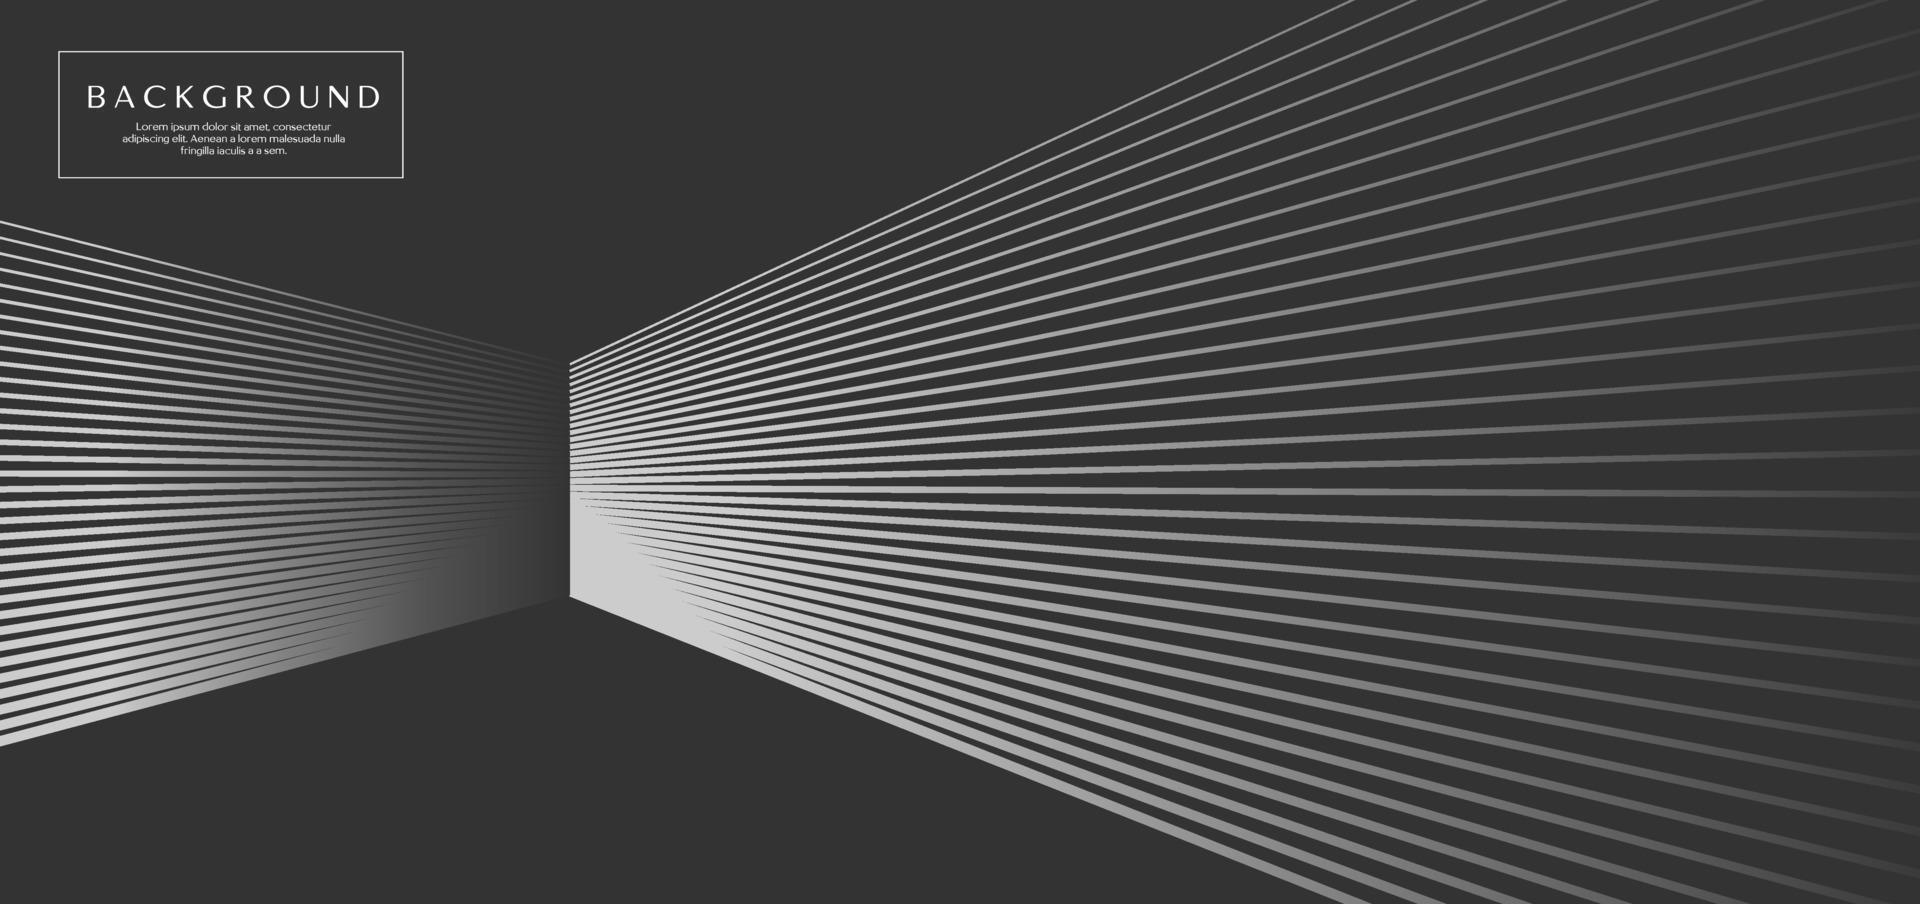 Monochrome side of room blend line abstract background. Dynamic geometric lines vector